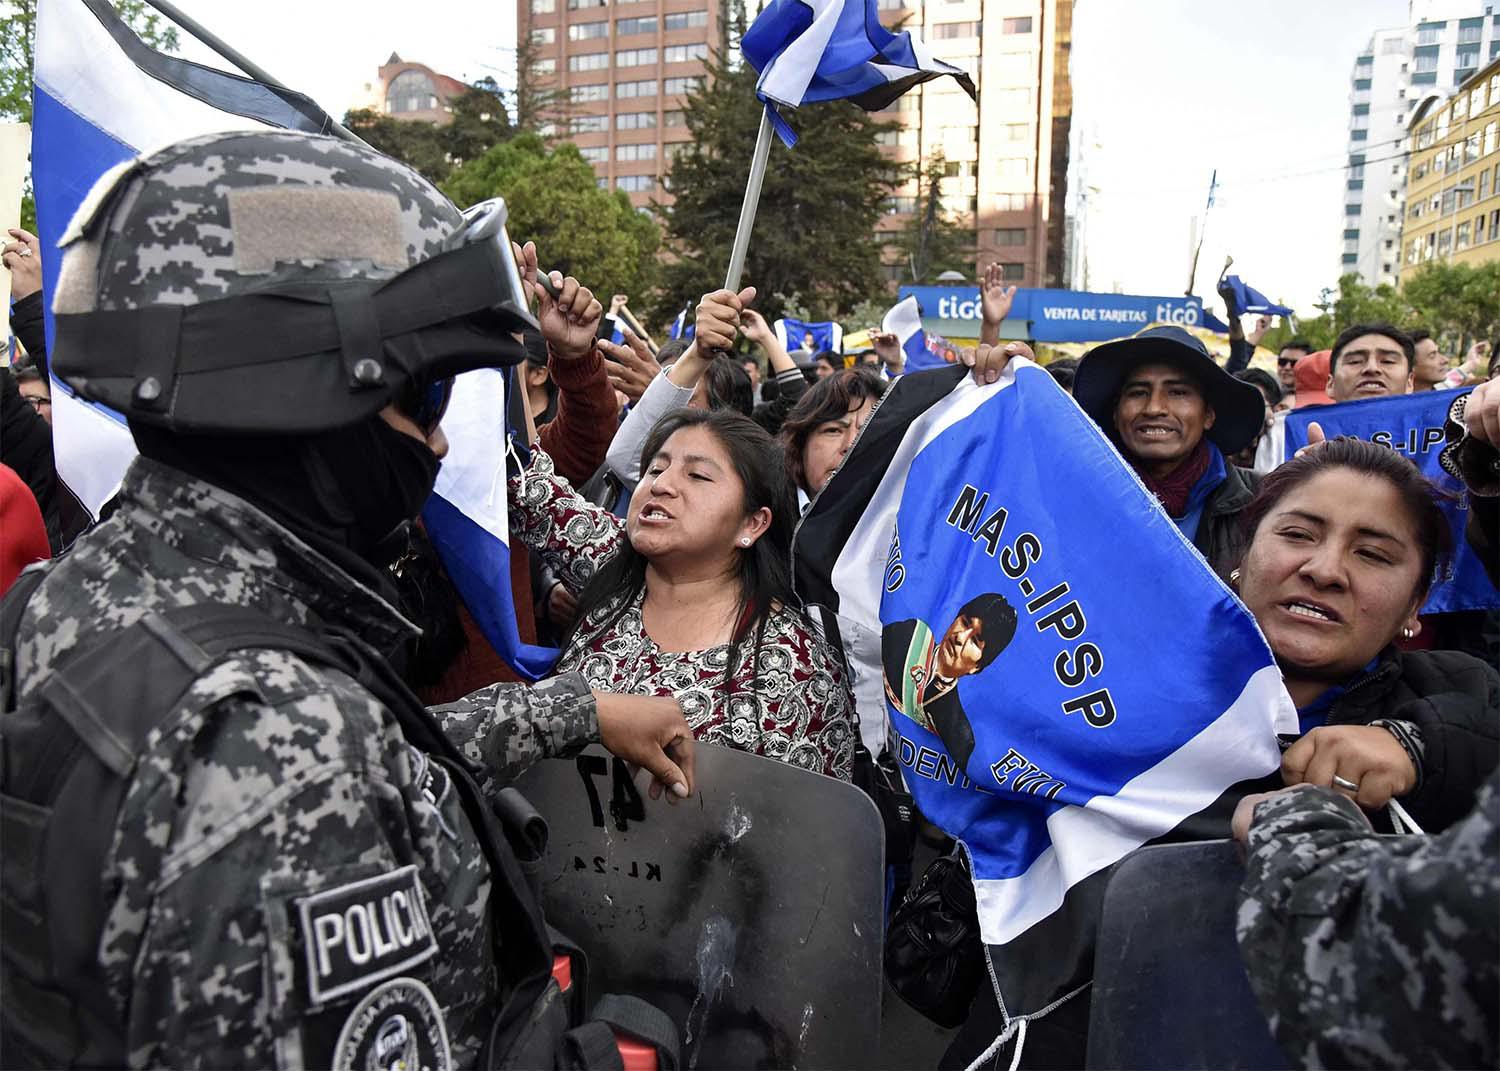 In Bolivia, the unrest is about President Evo Morales’s fourth-term election victory, which some describe as a fraud 